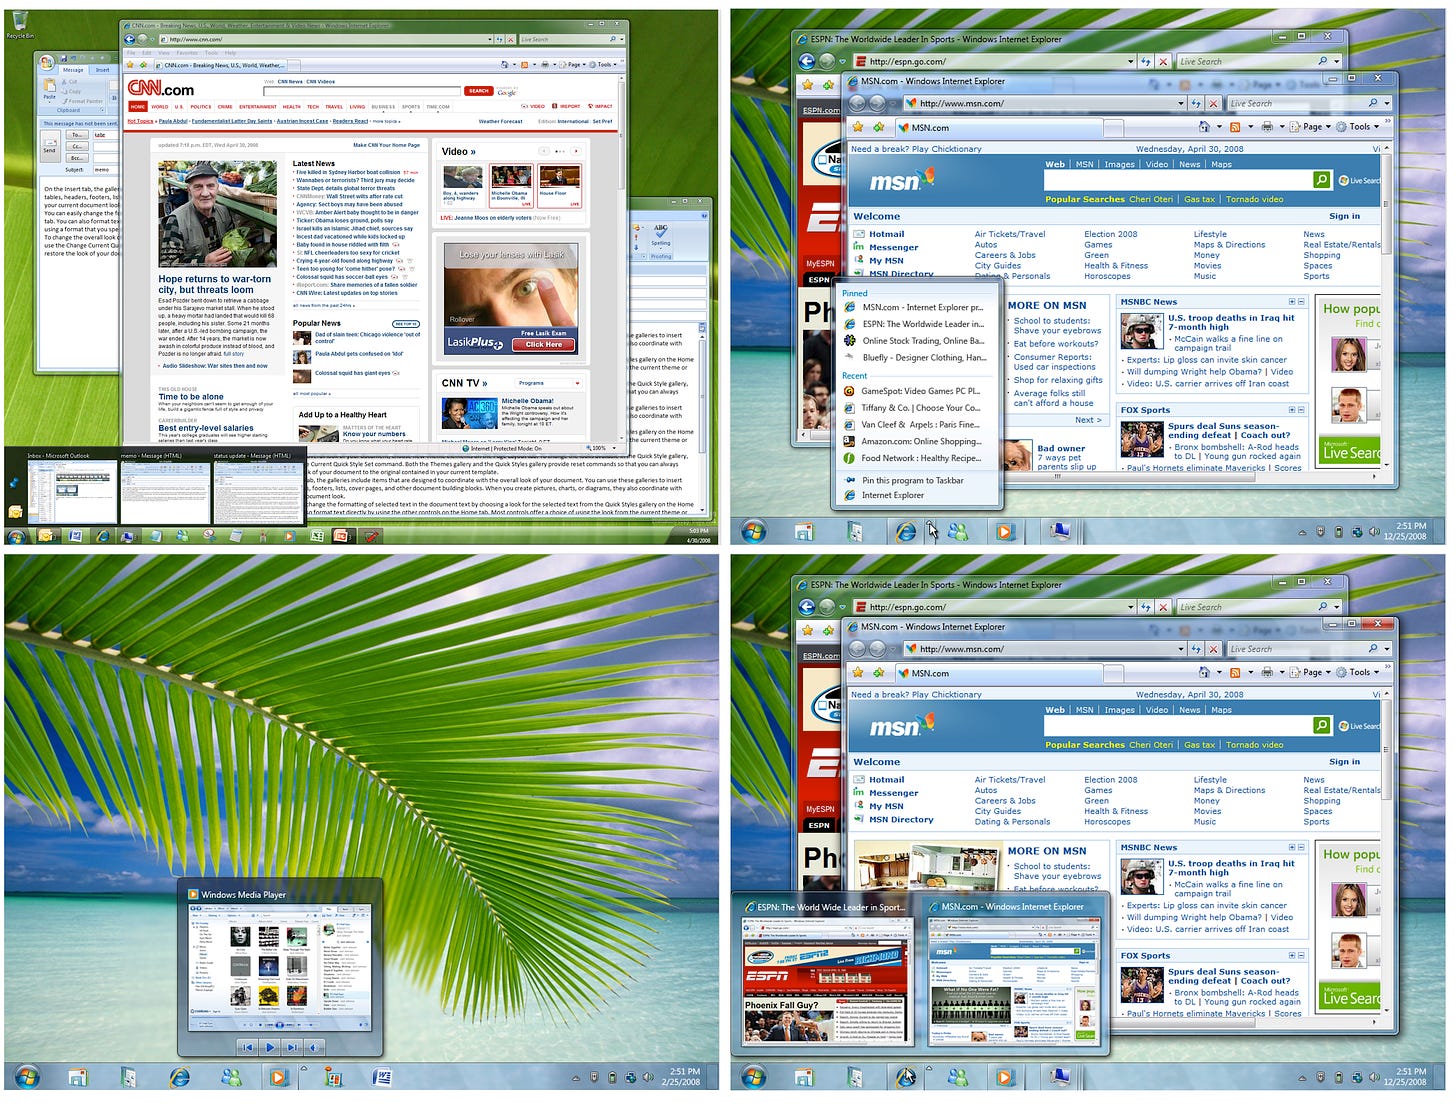 Four screenshots showing the new Windows 7 Superbar in action: one showing an app with multiple windows, one showing Internet Explorer with multiple tabs. Both of those show how hovering the mouse at the superbar shows small window previews. A third showing the Windows Media Player with a preview of album art and audio play controls. A fourth showing the "jump list" right click feature to open recent items or execute app specific commands.